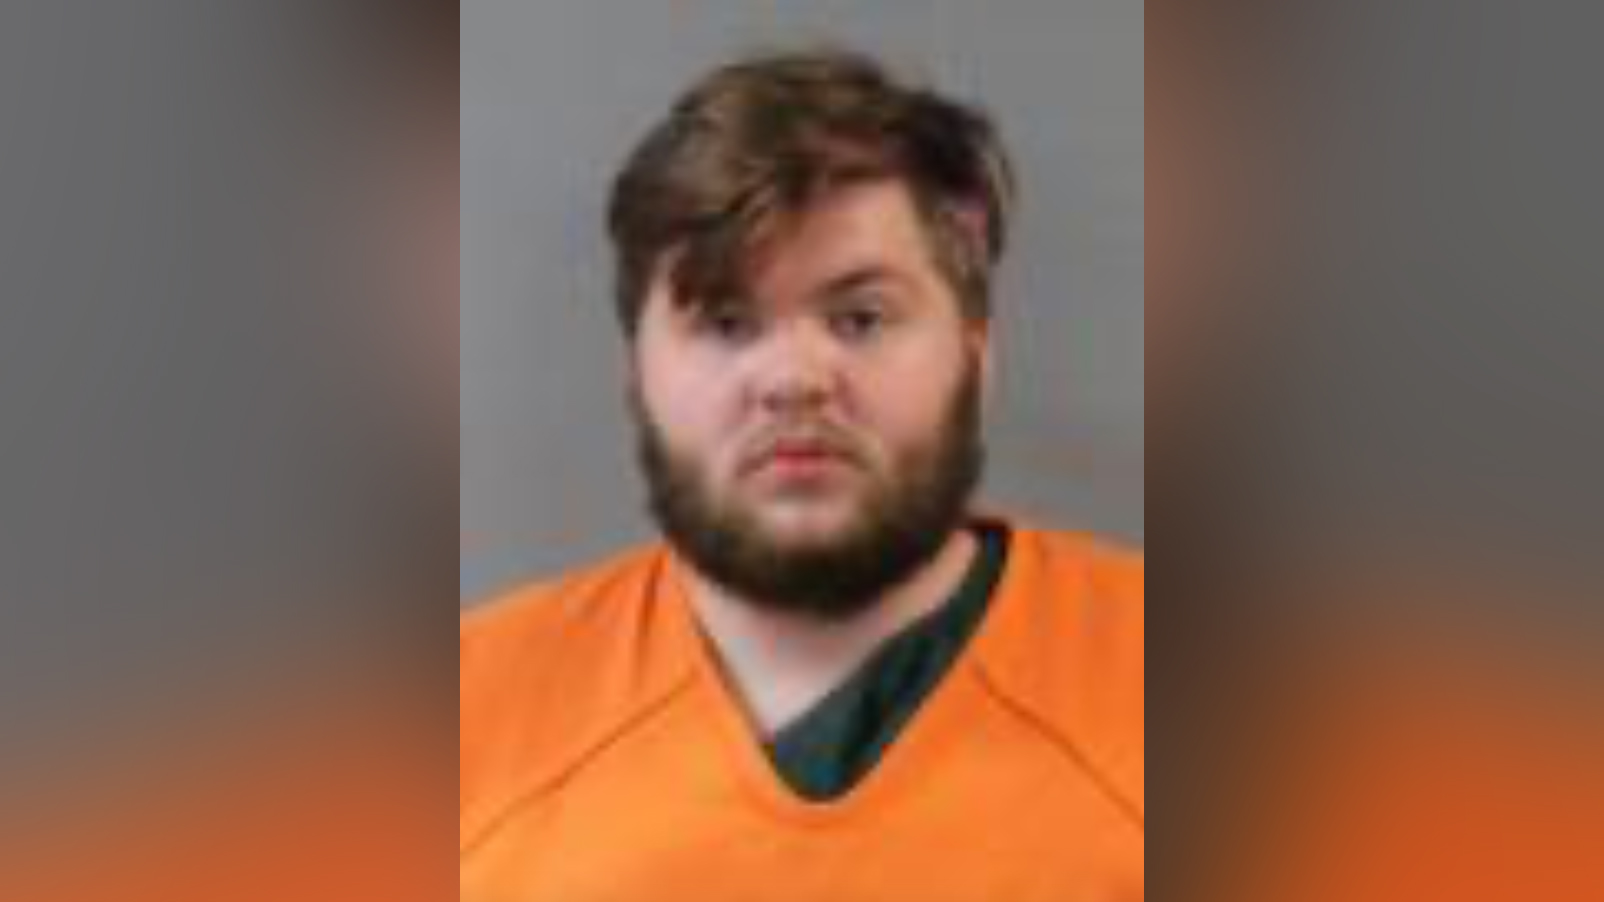 Landon Parrot was booked on charges in the death of his 1-year-old son in a hot car, authorities sa...